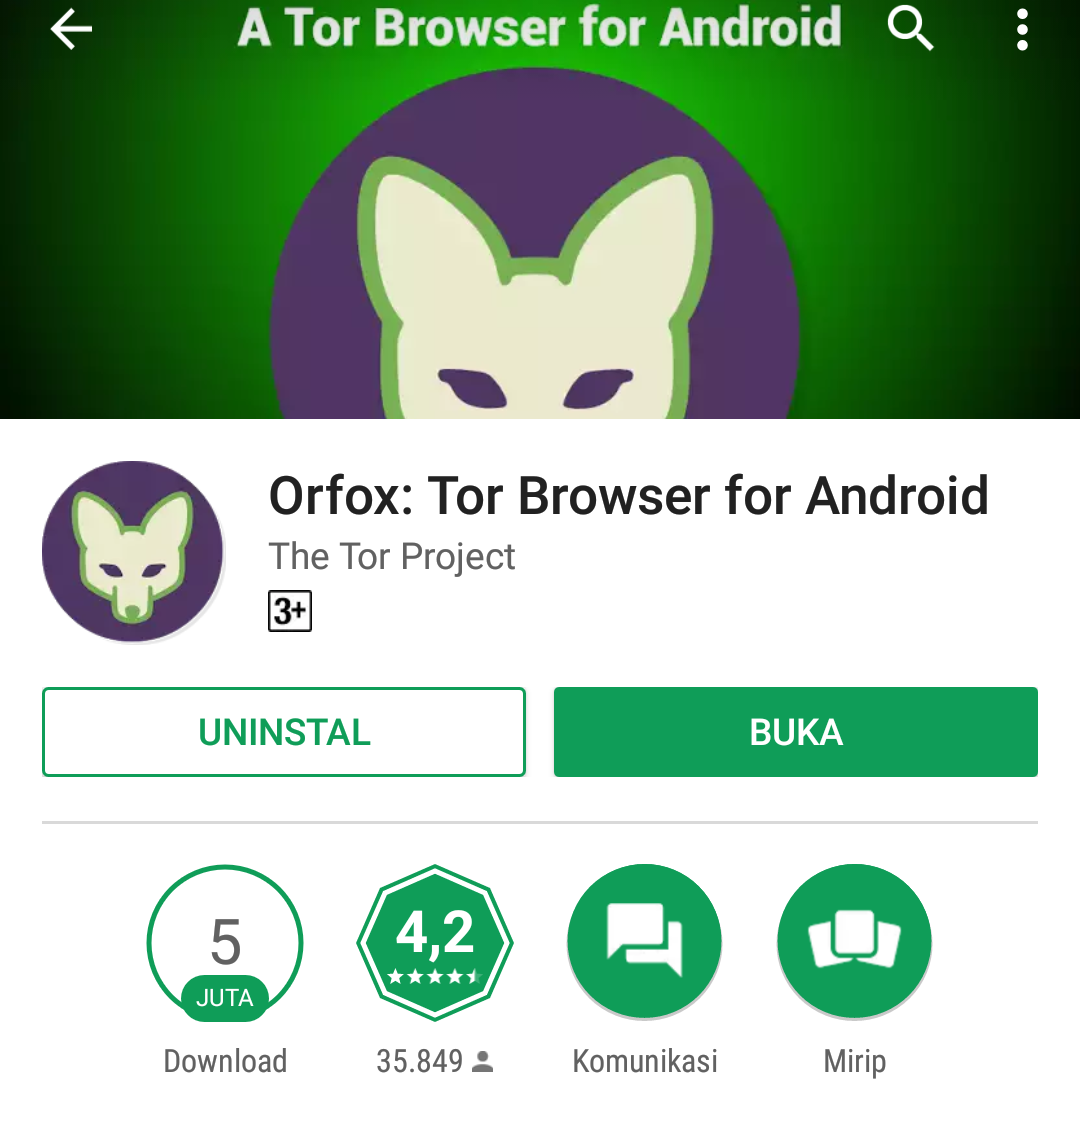 Orfox tor browser for android rus mega darknet markets list